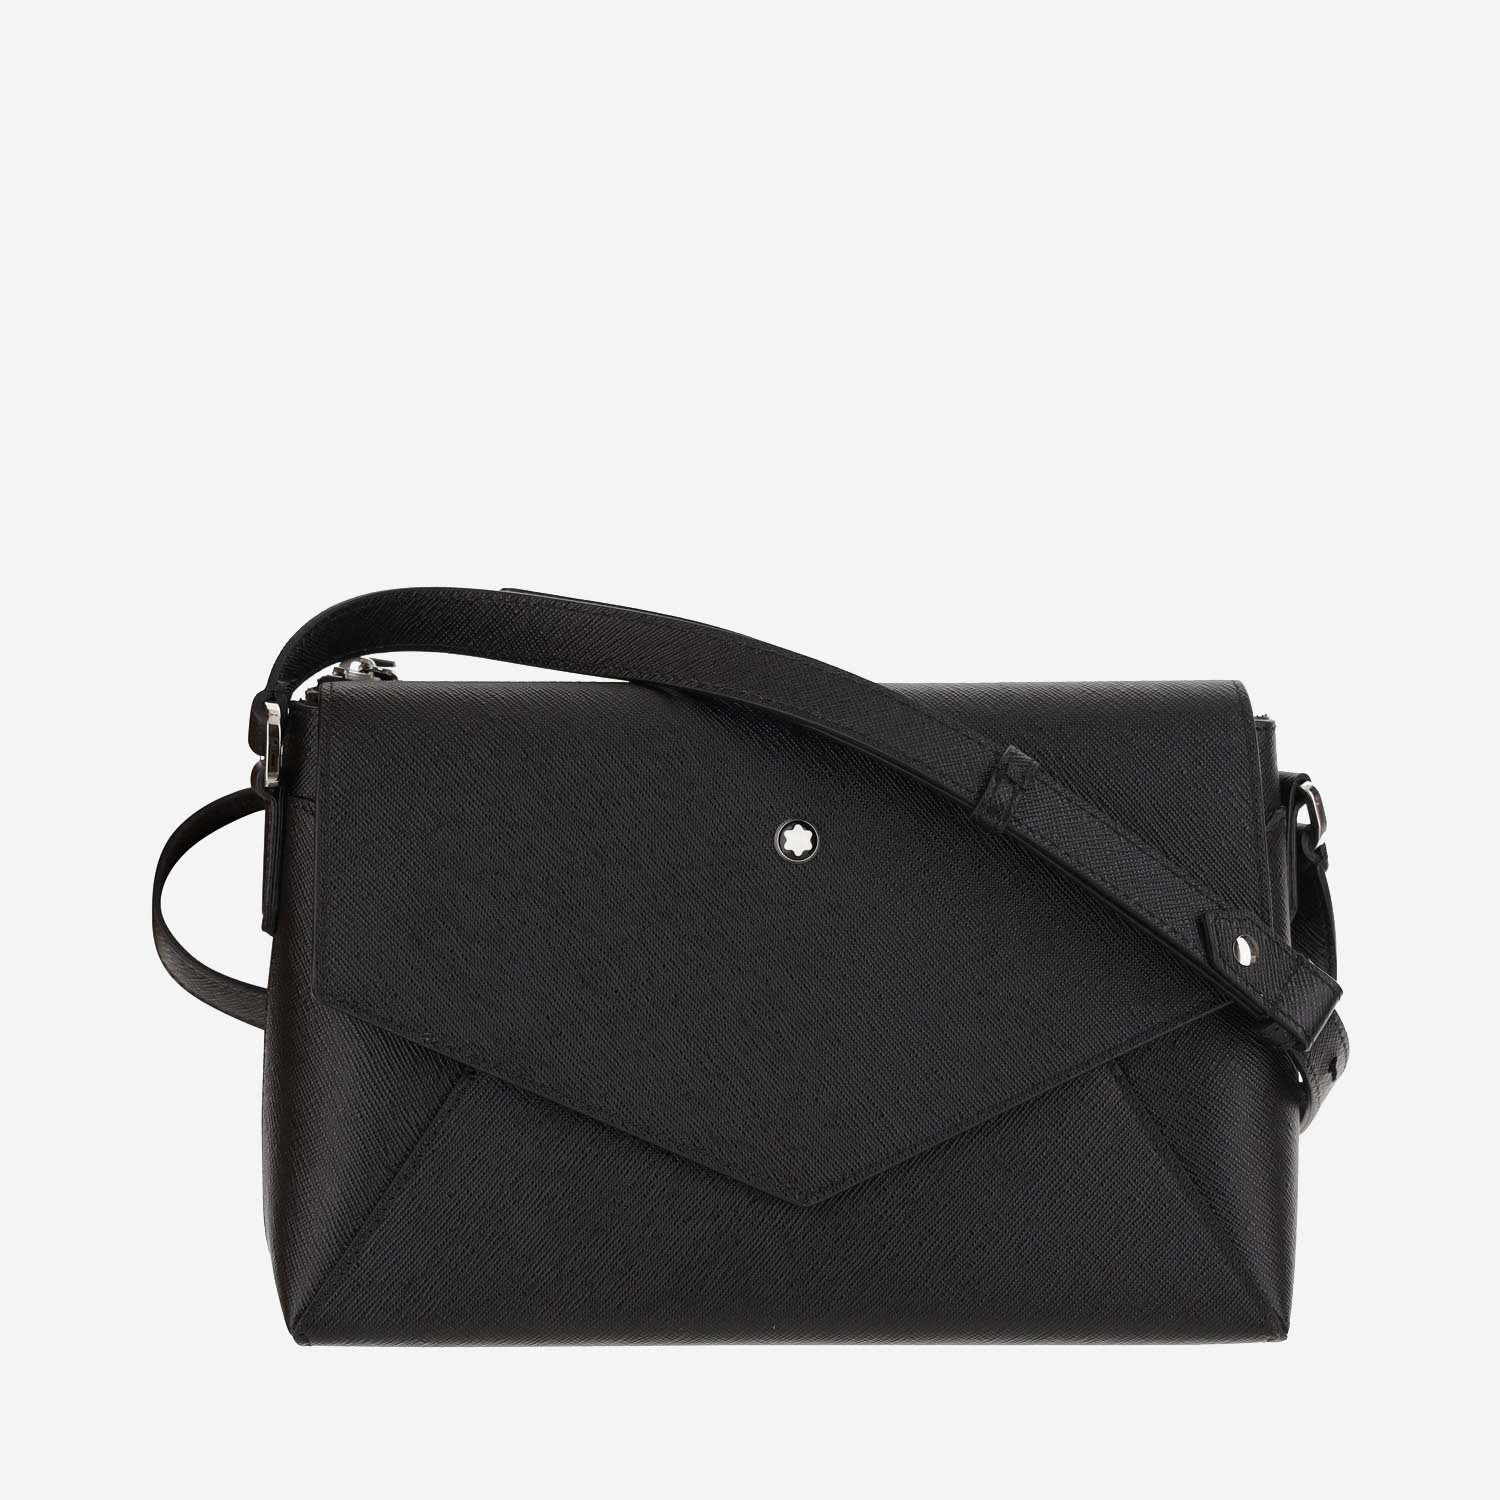 Montblanc Double Sartorial Bag In Black